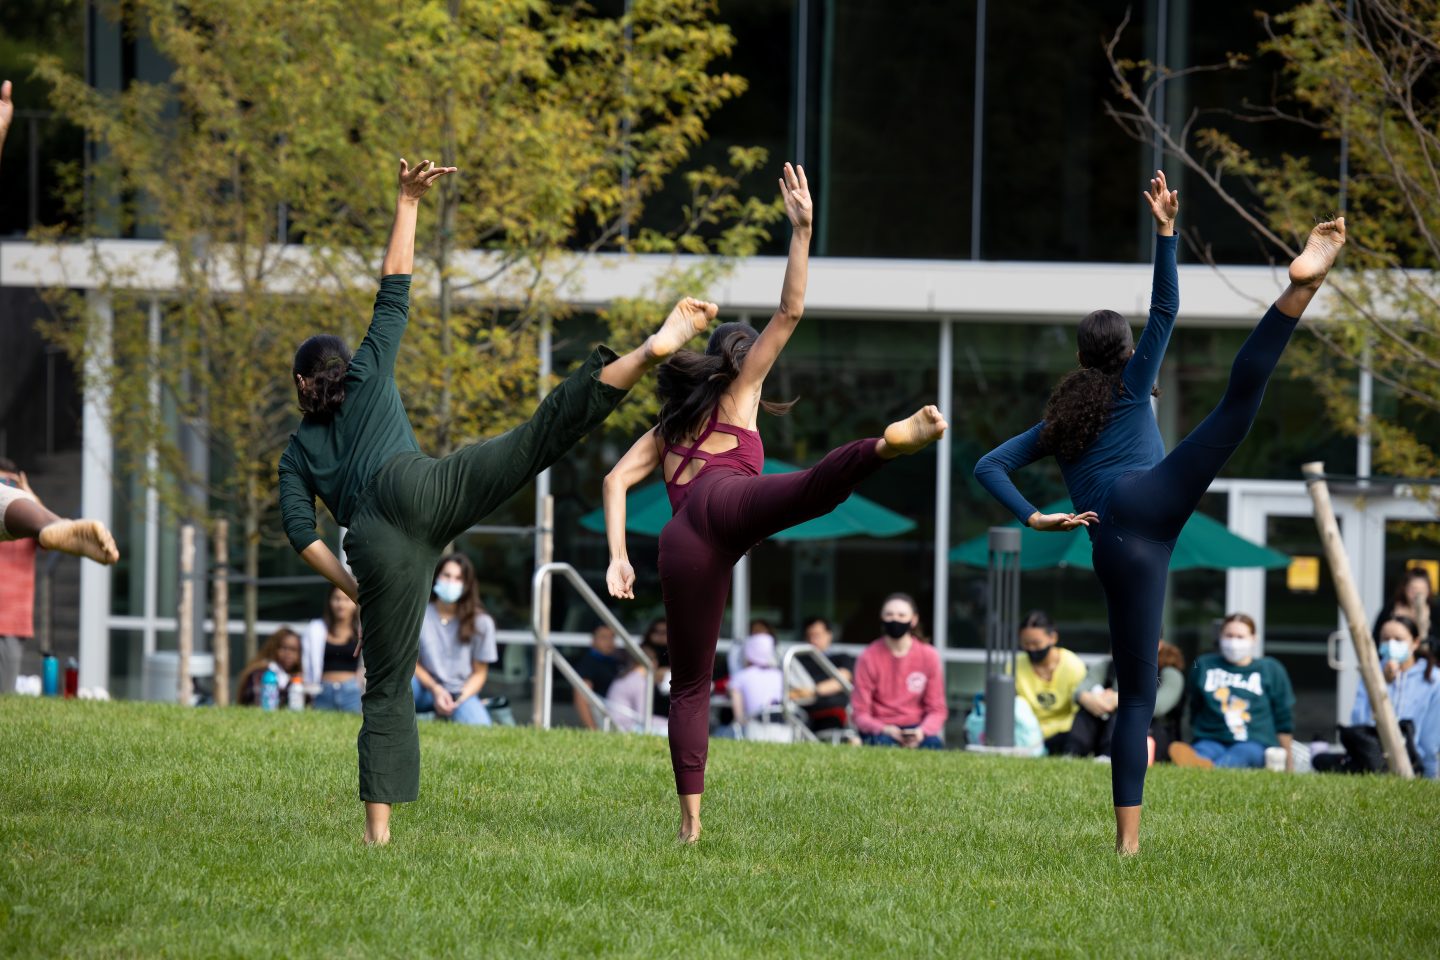 Adelphi Dance students perform on the lawn during the 2021 Fall Arts Festival.